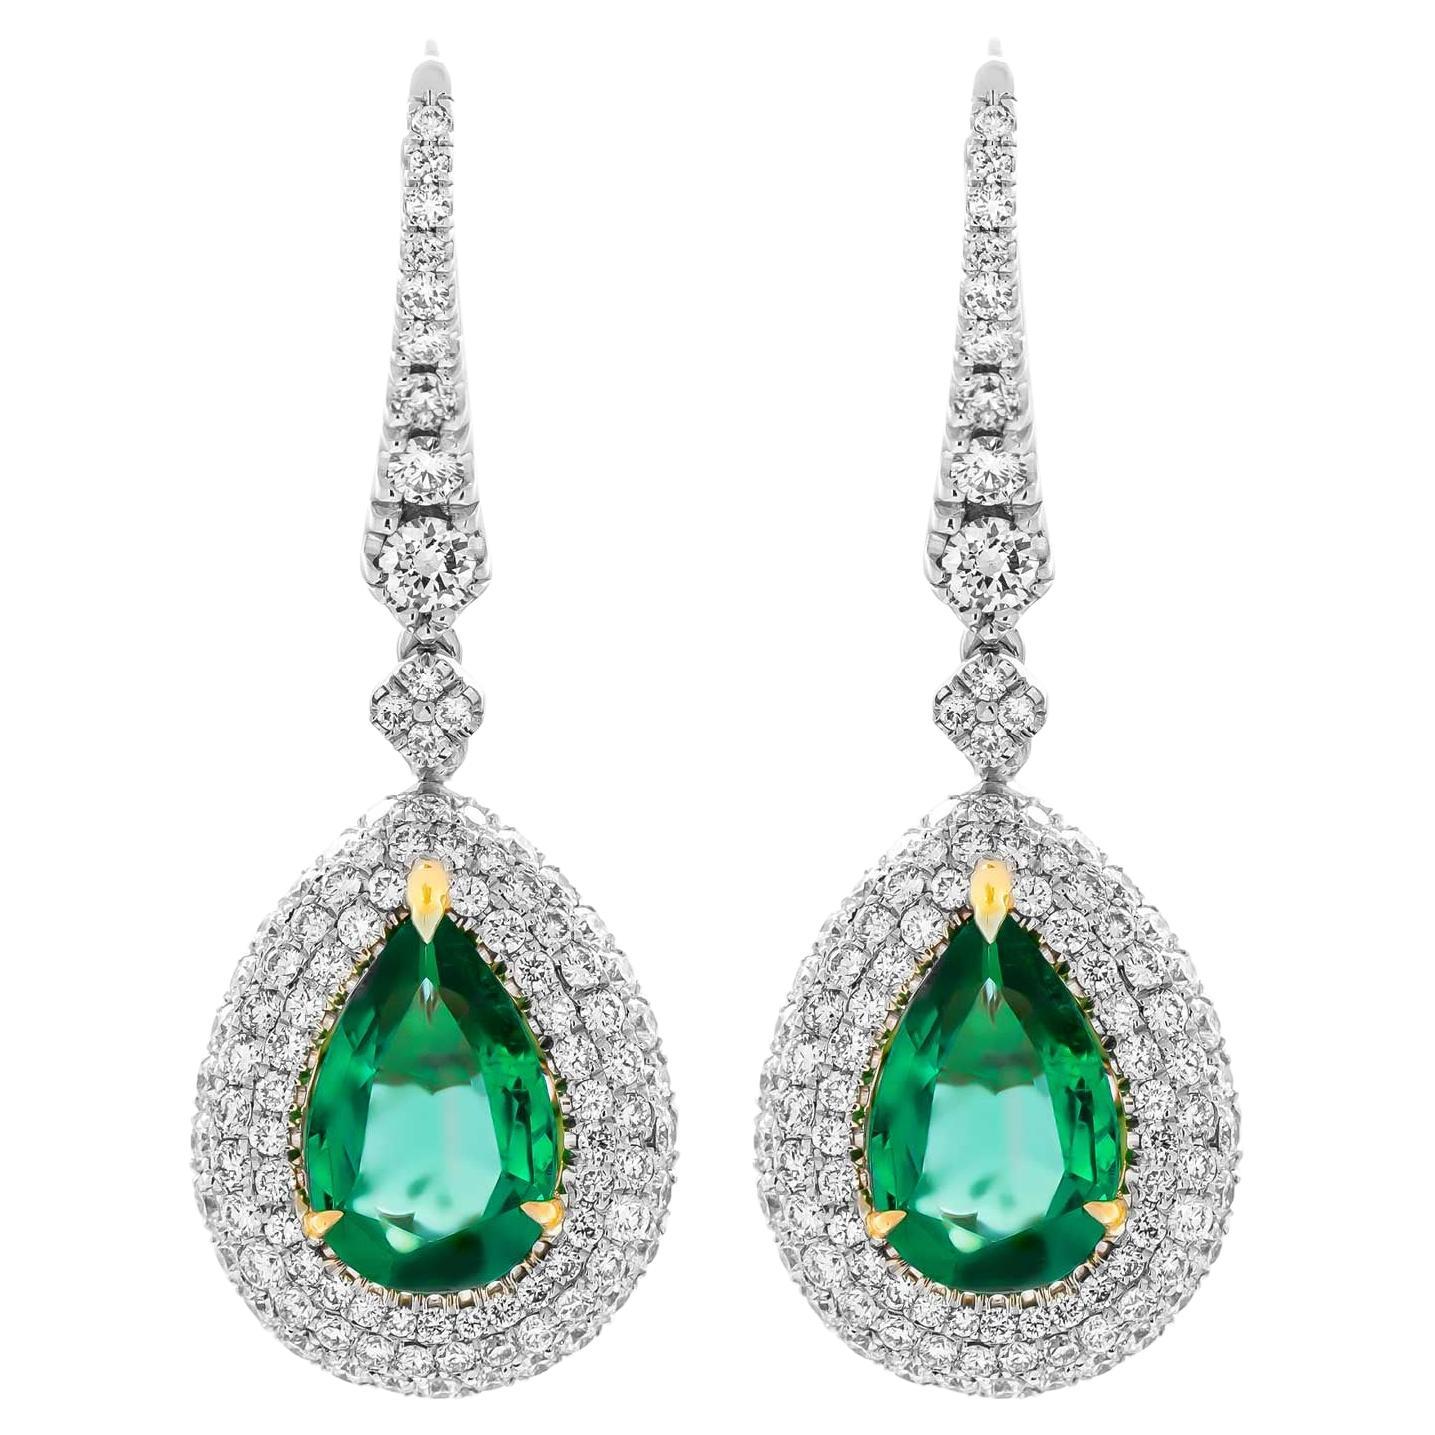 Drop Earrings with Pear Shape Emeralds 6.96ct and Diamonds